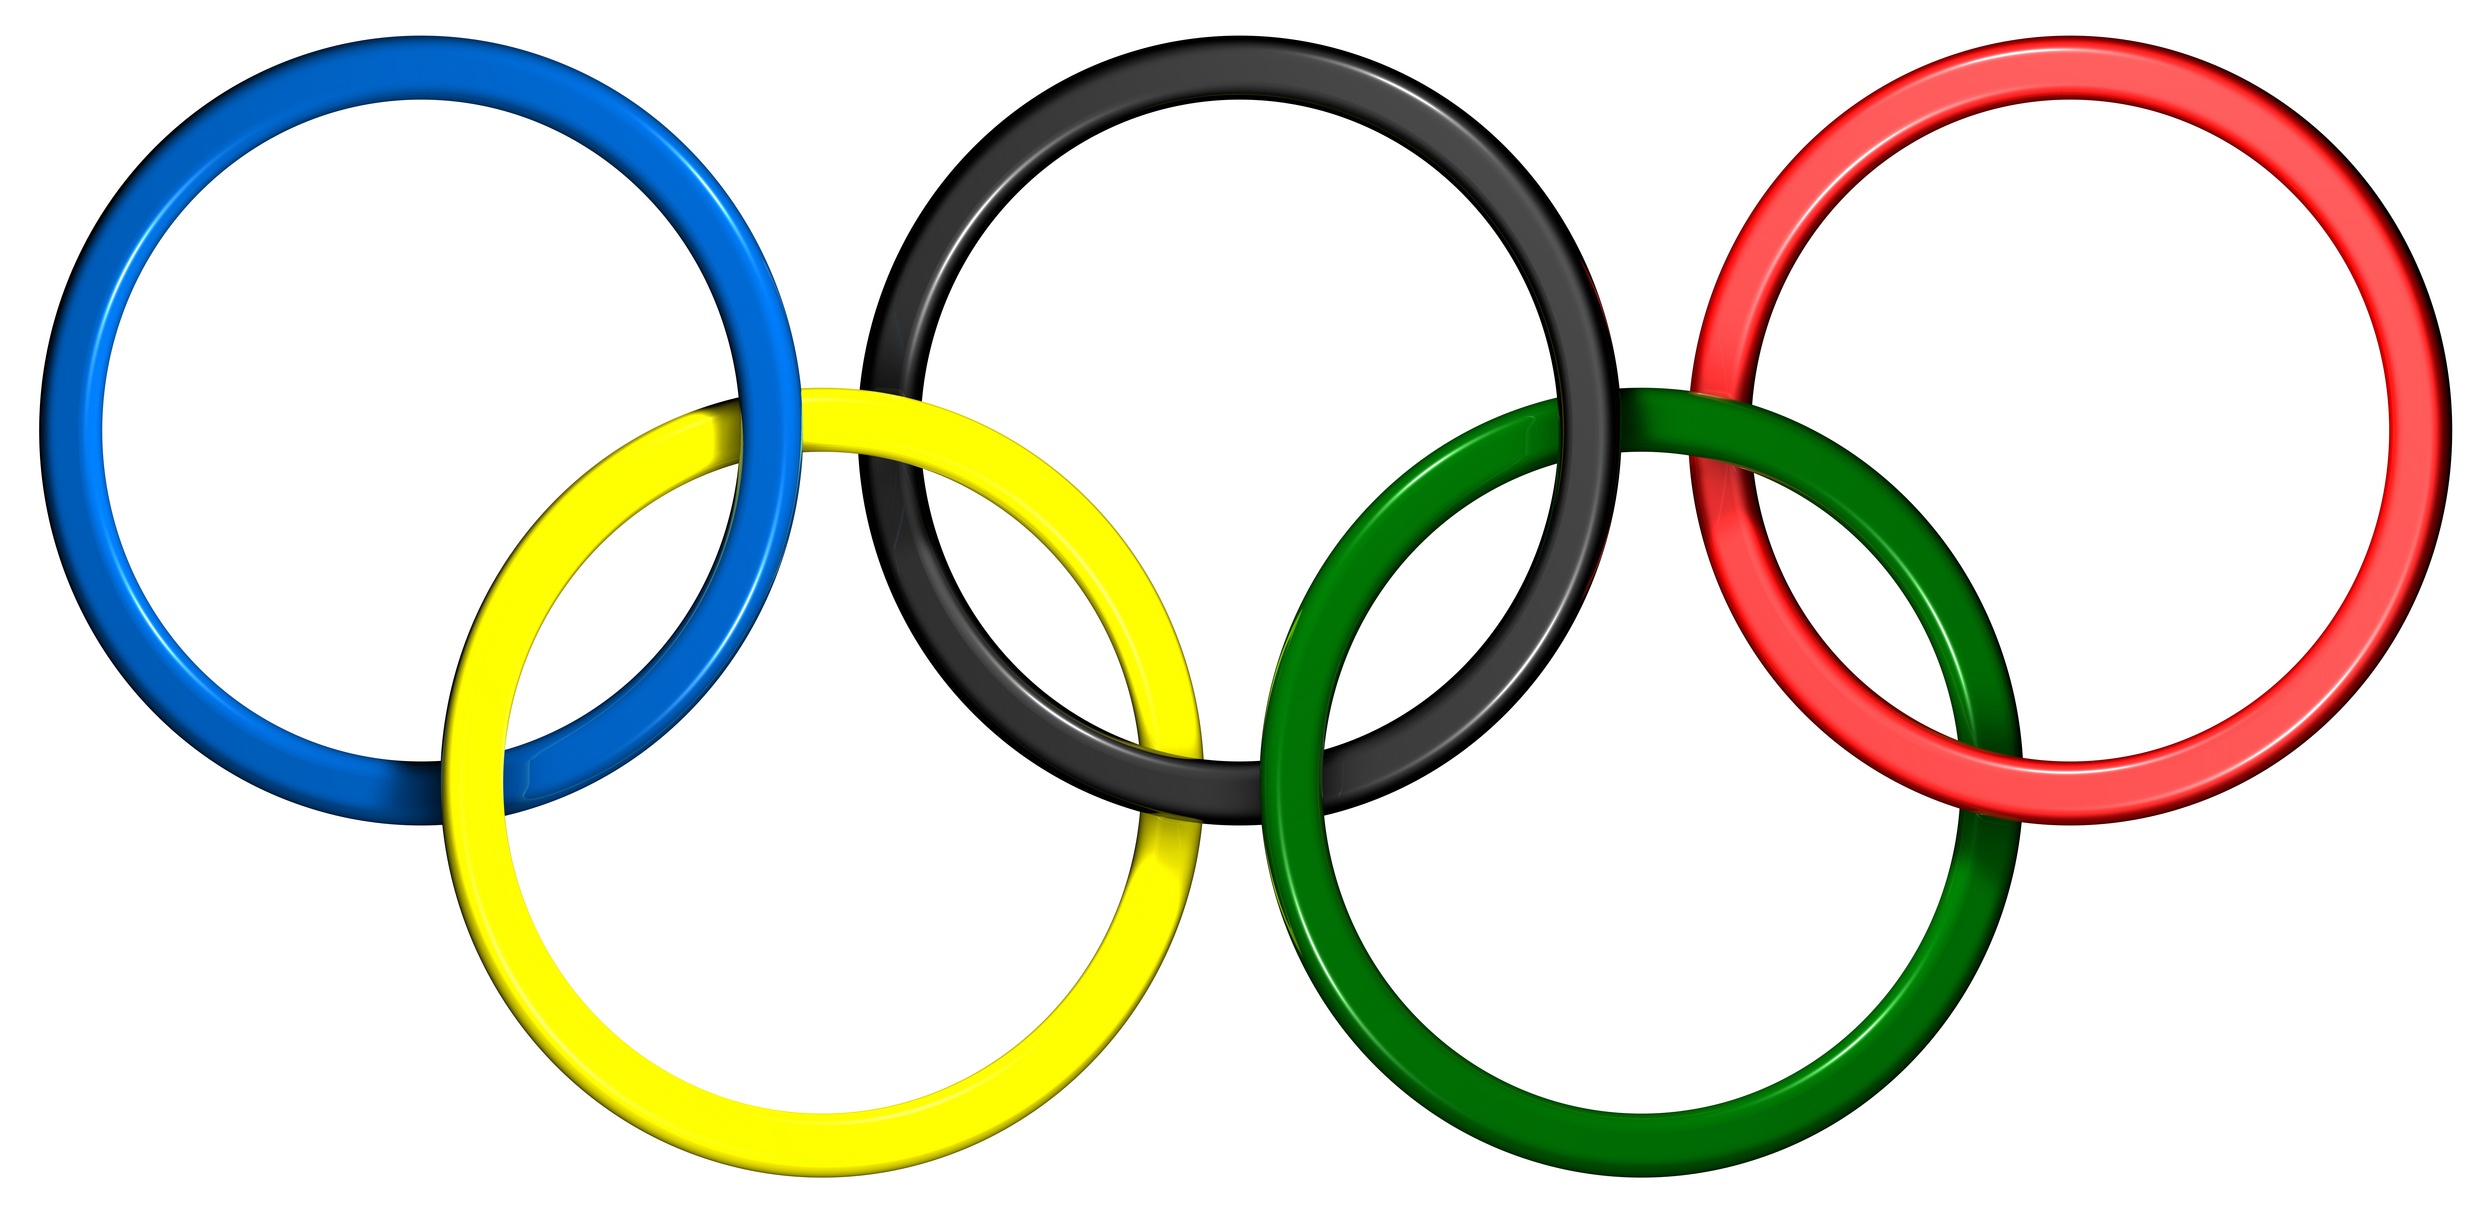 Free Olympics Rings, Download Free Clip Art, Free Clip Art.